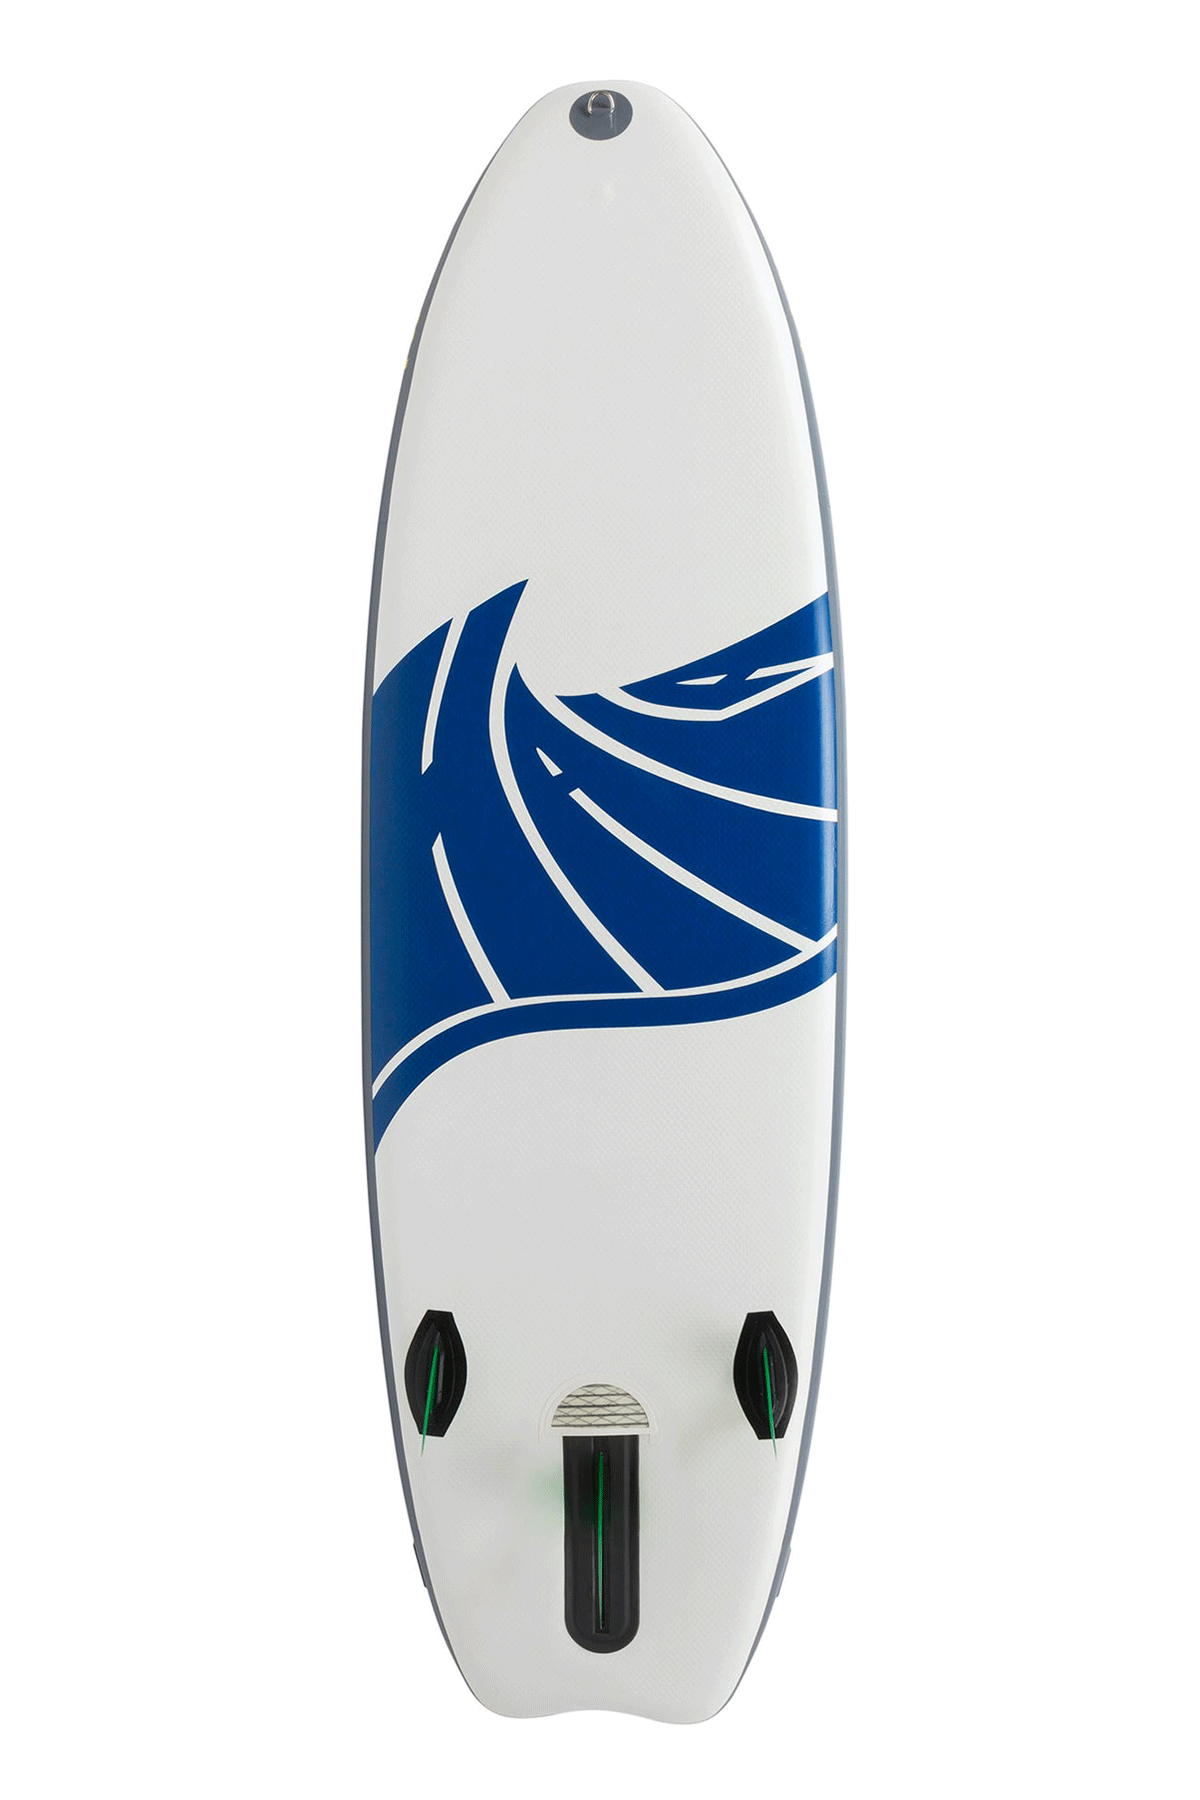 Radito Hala Inflatable Paddleboard Package Bottom View